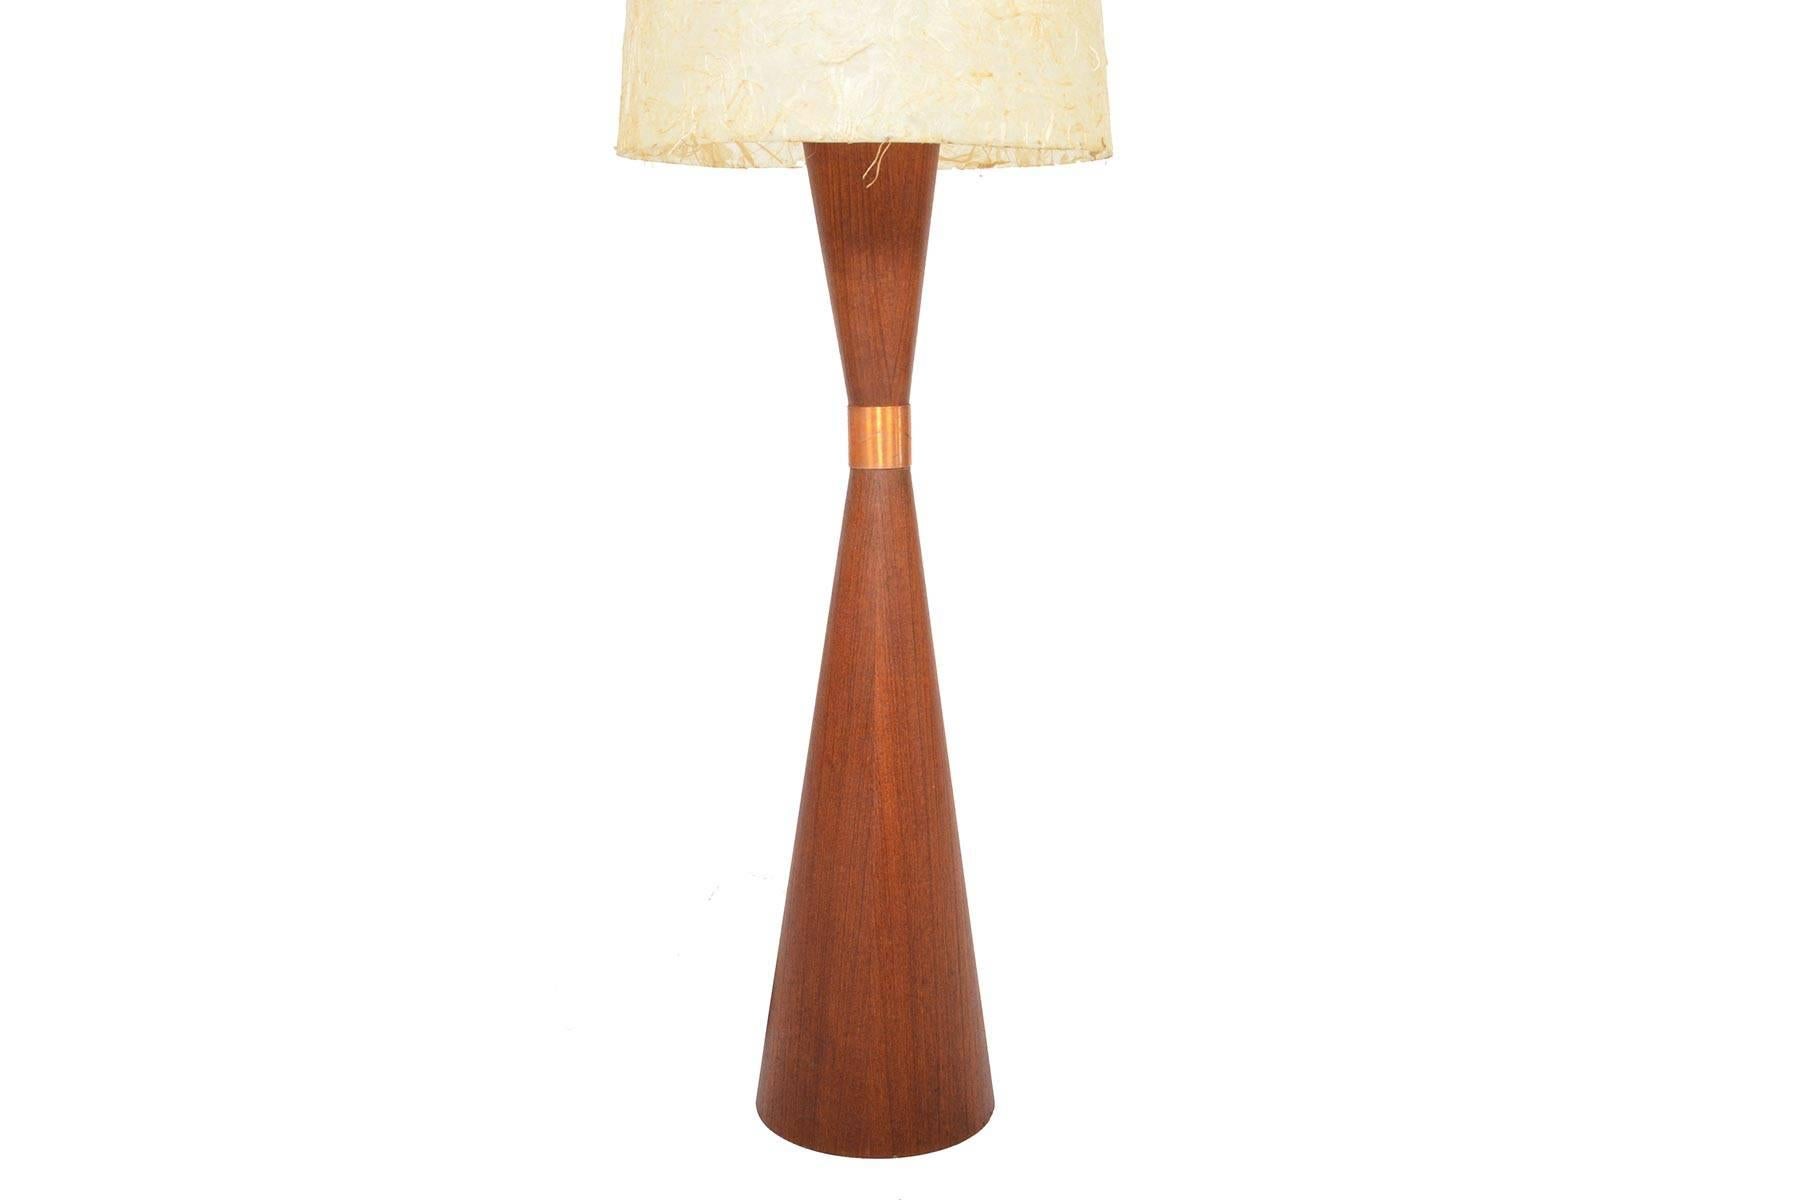 This beautiful Italian modern teak hourglass floor lamp was designed in the 1960s. The base is weighted for a sturdy yet elegant Silhouette. A copper cuff sits in the centre. Original paper shade provides a warm glow. In excellent original condition